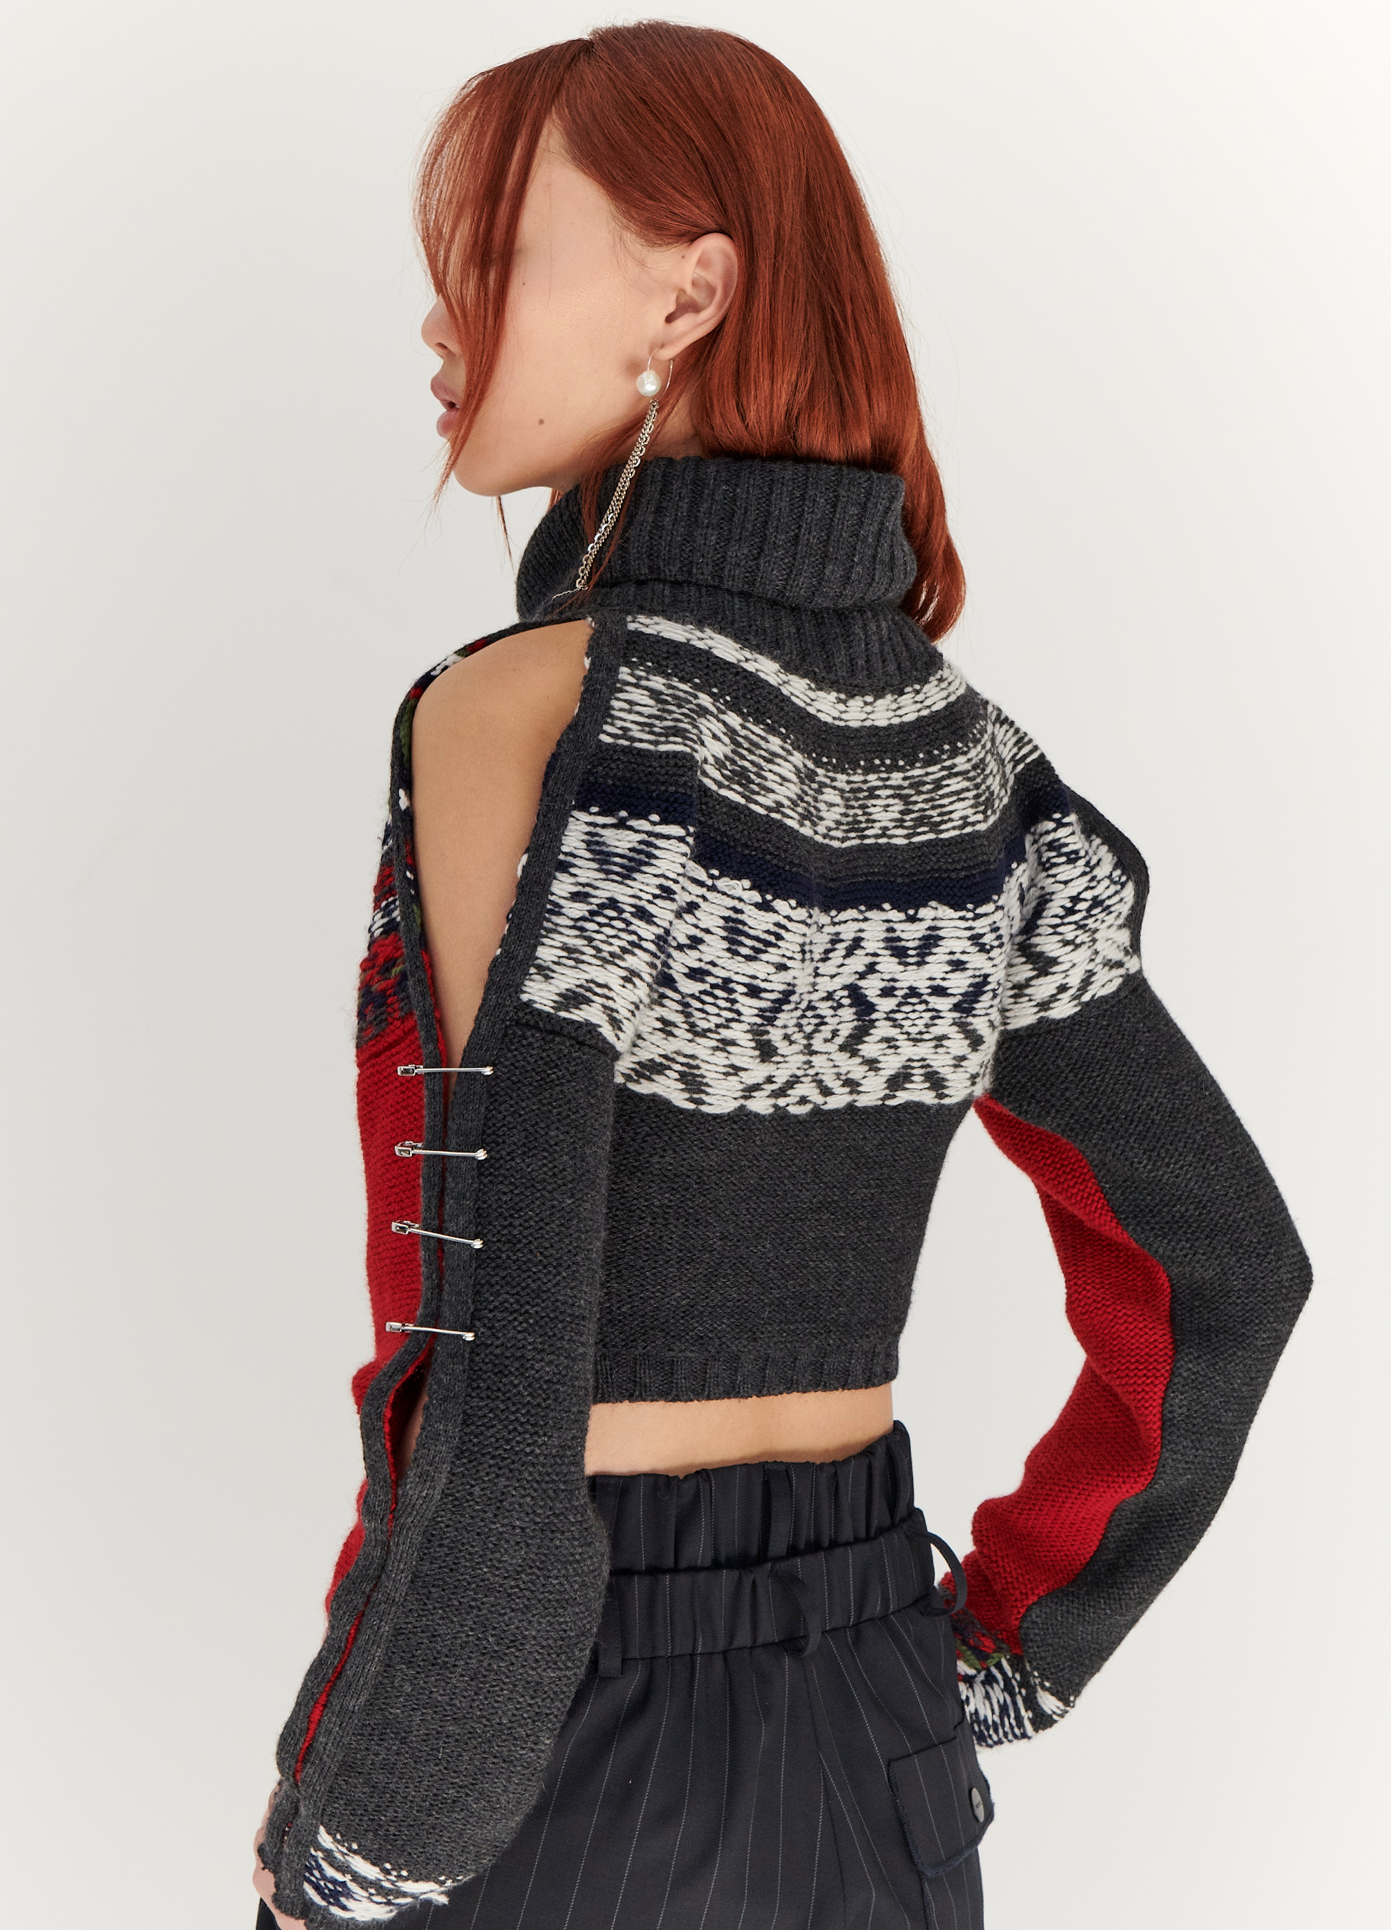 MONSE Cropped Fairisle Turtleneck Sweater  in Red and Charcoal on model back side view